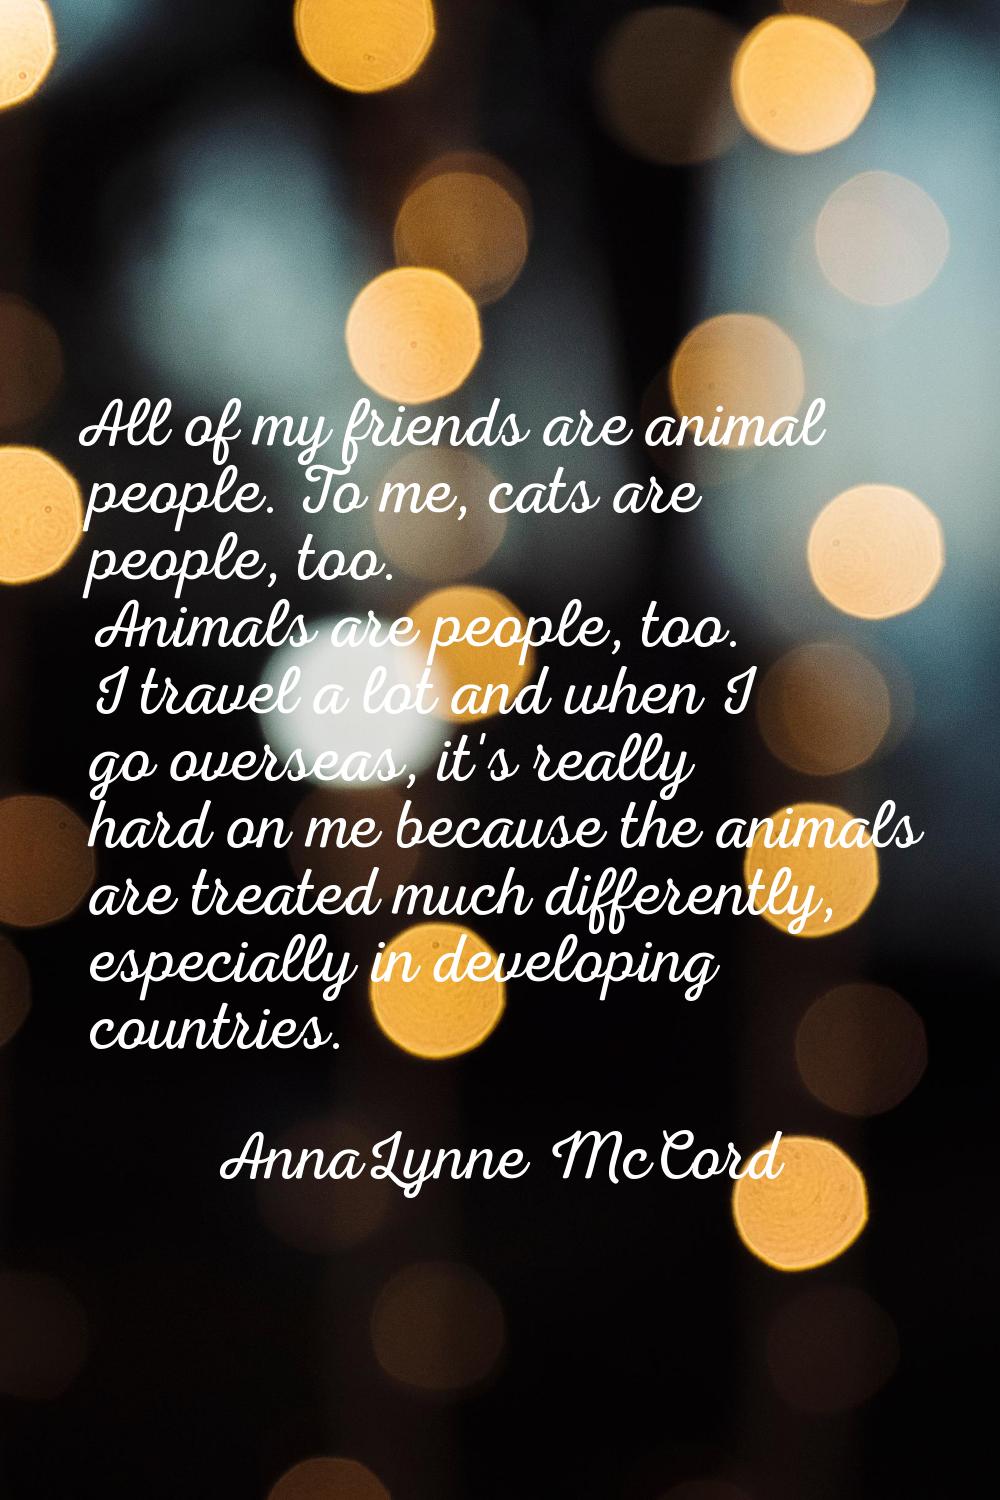 All of my friends are animal people. To me, cats are people, too. Animals are people, too. I travel